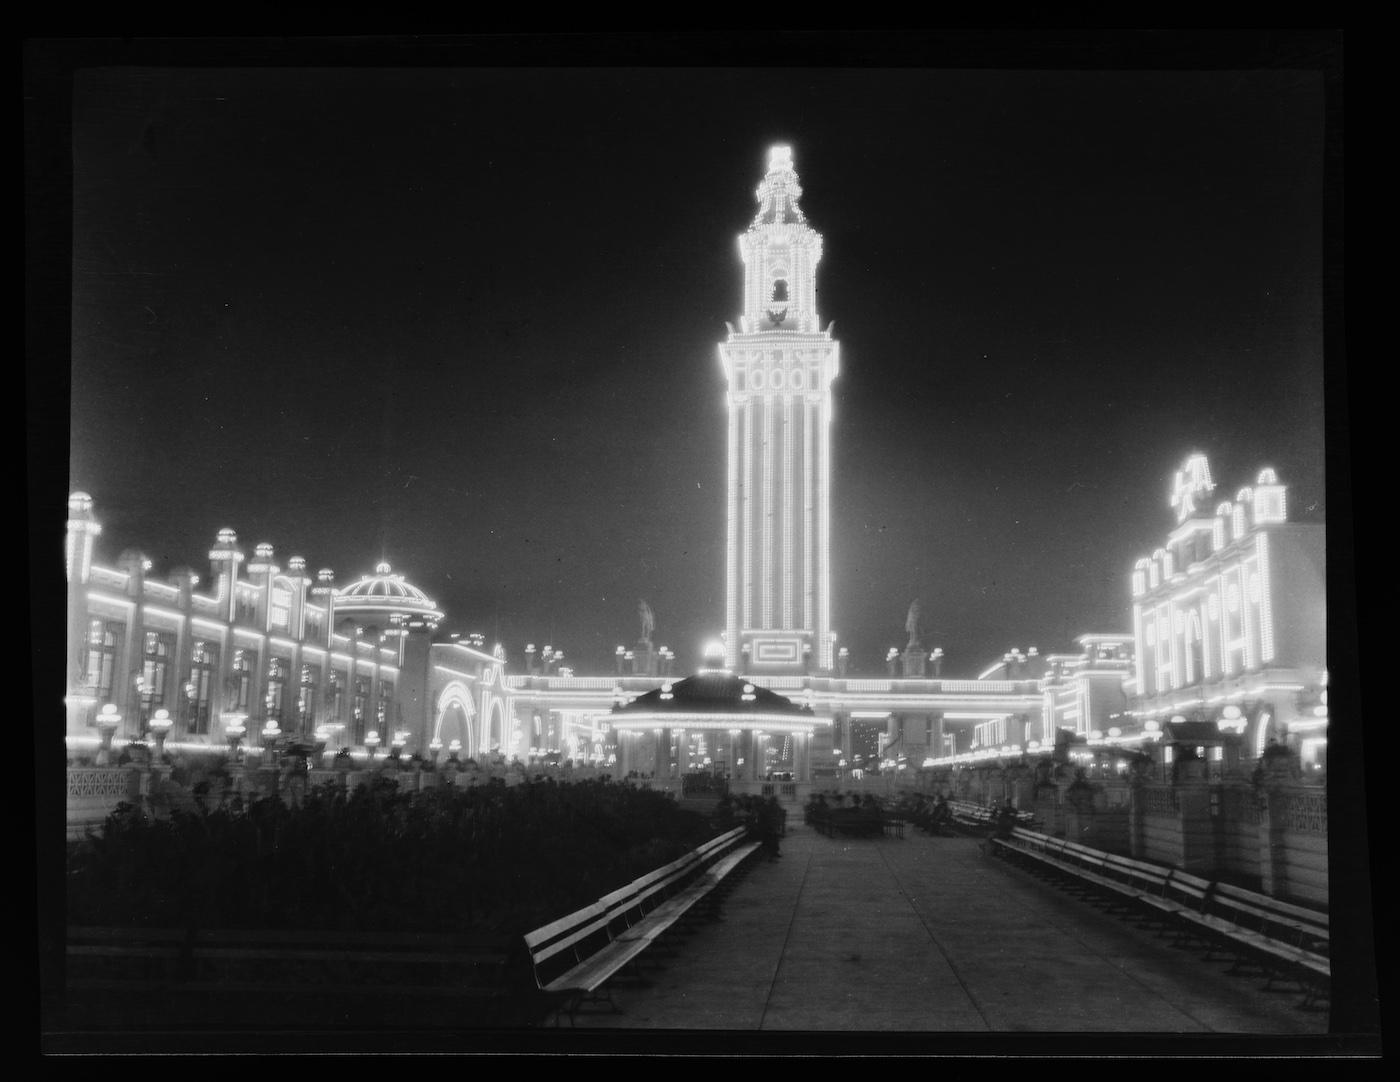 White City amusement park in Chicago in 1905 or 1906. Photo: Chicago History Museum, ICHi-070022; Charles R. Clark, photographer